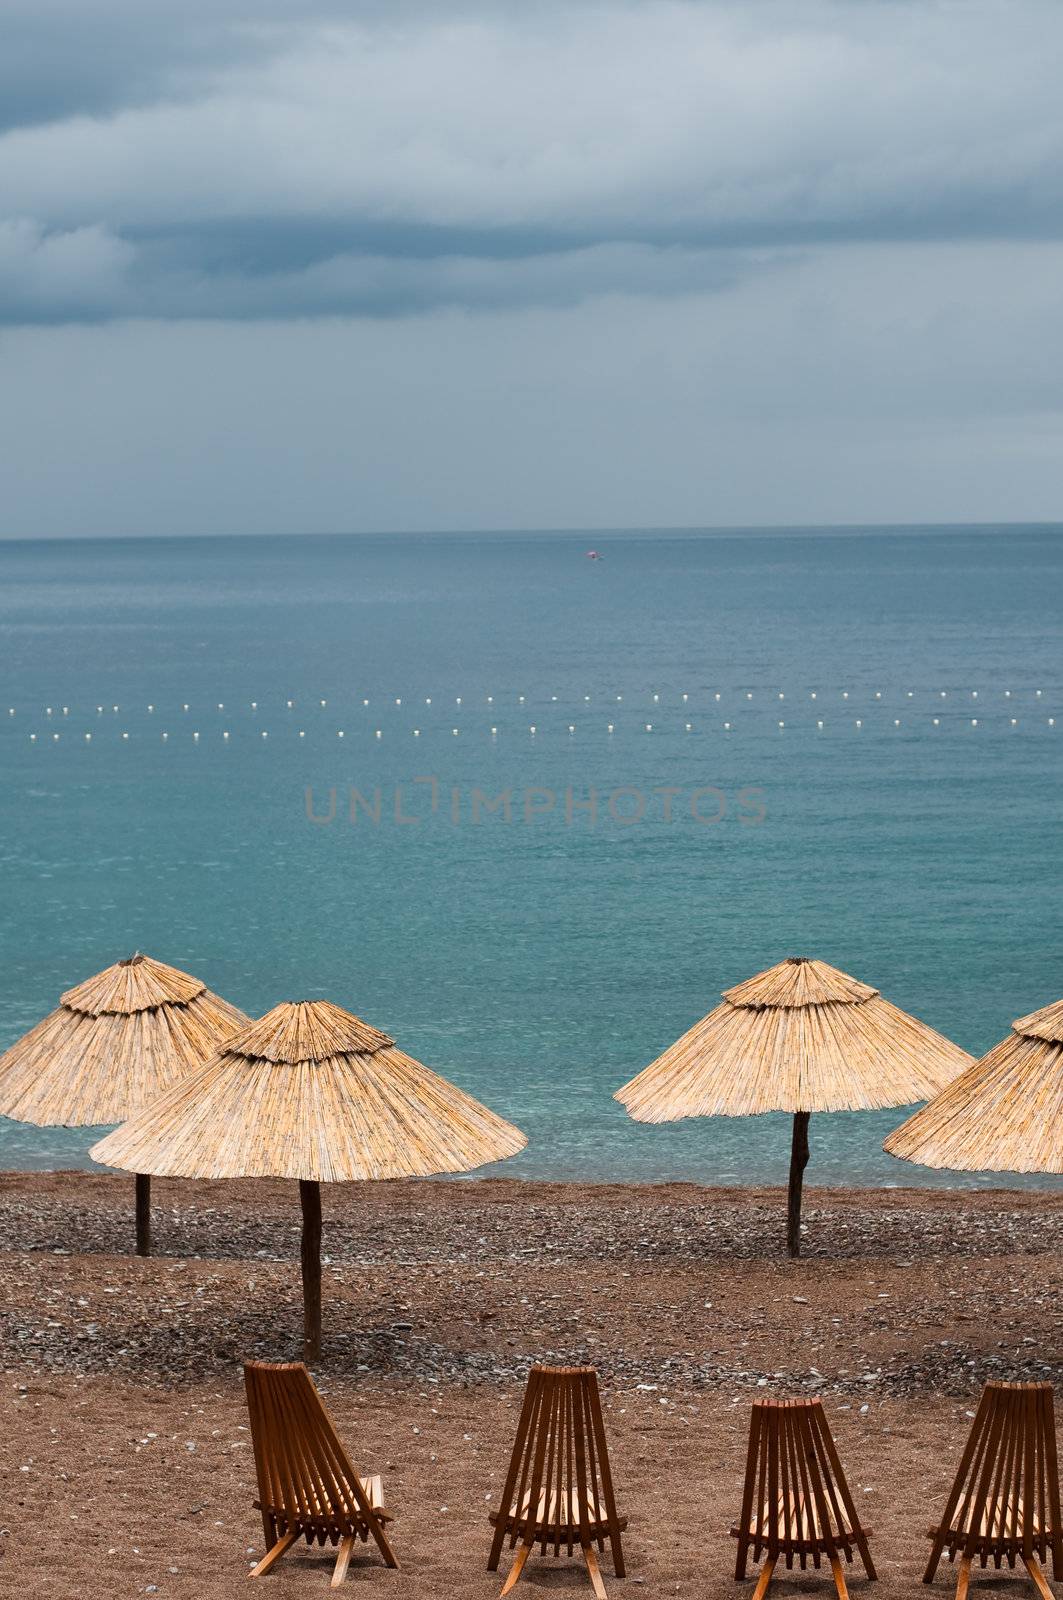 empty chairs and umbrellas waiting for the storm on the beach